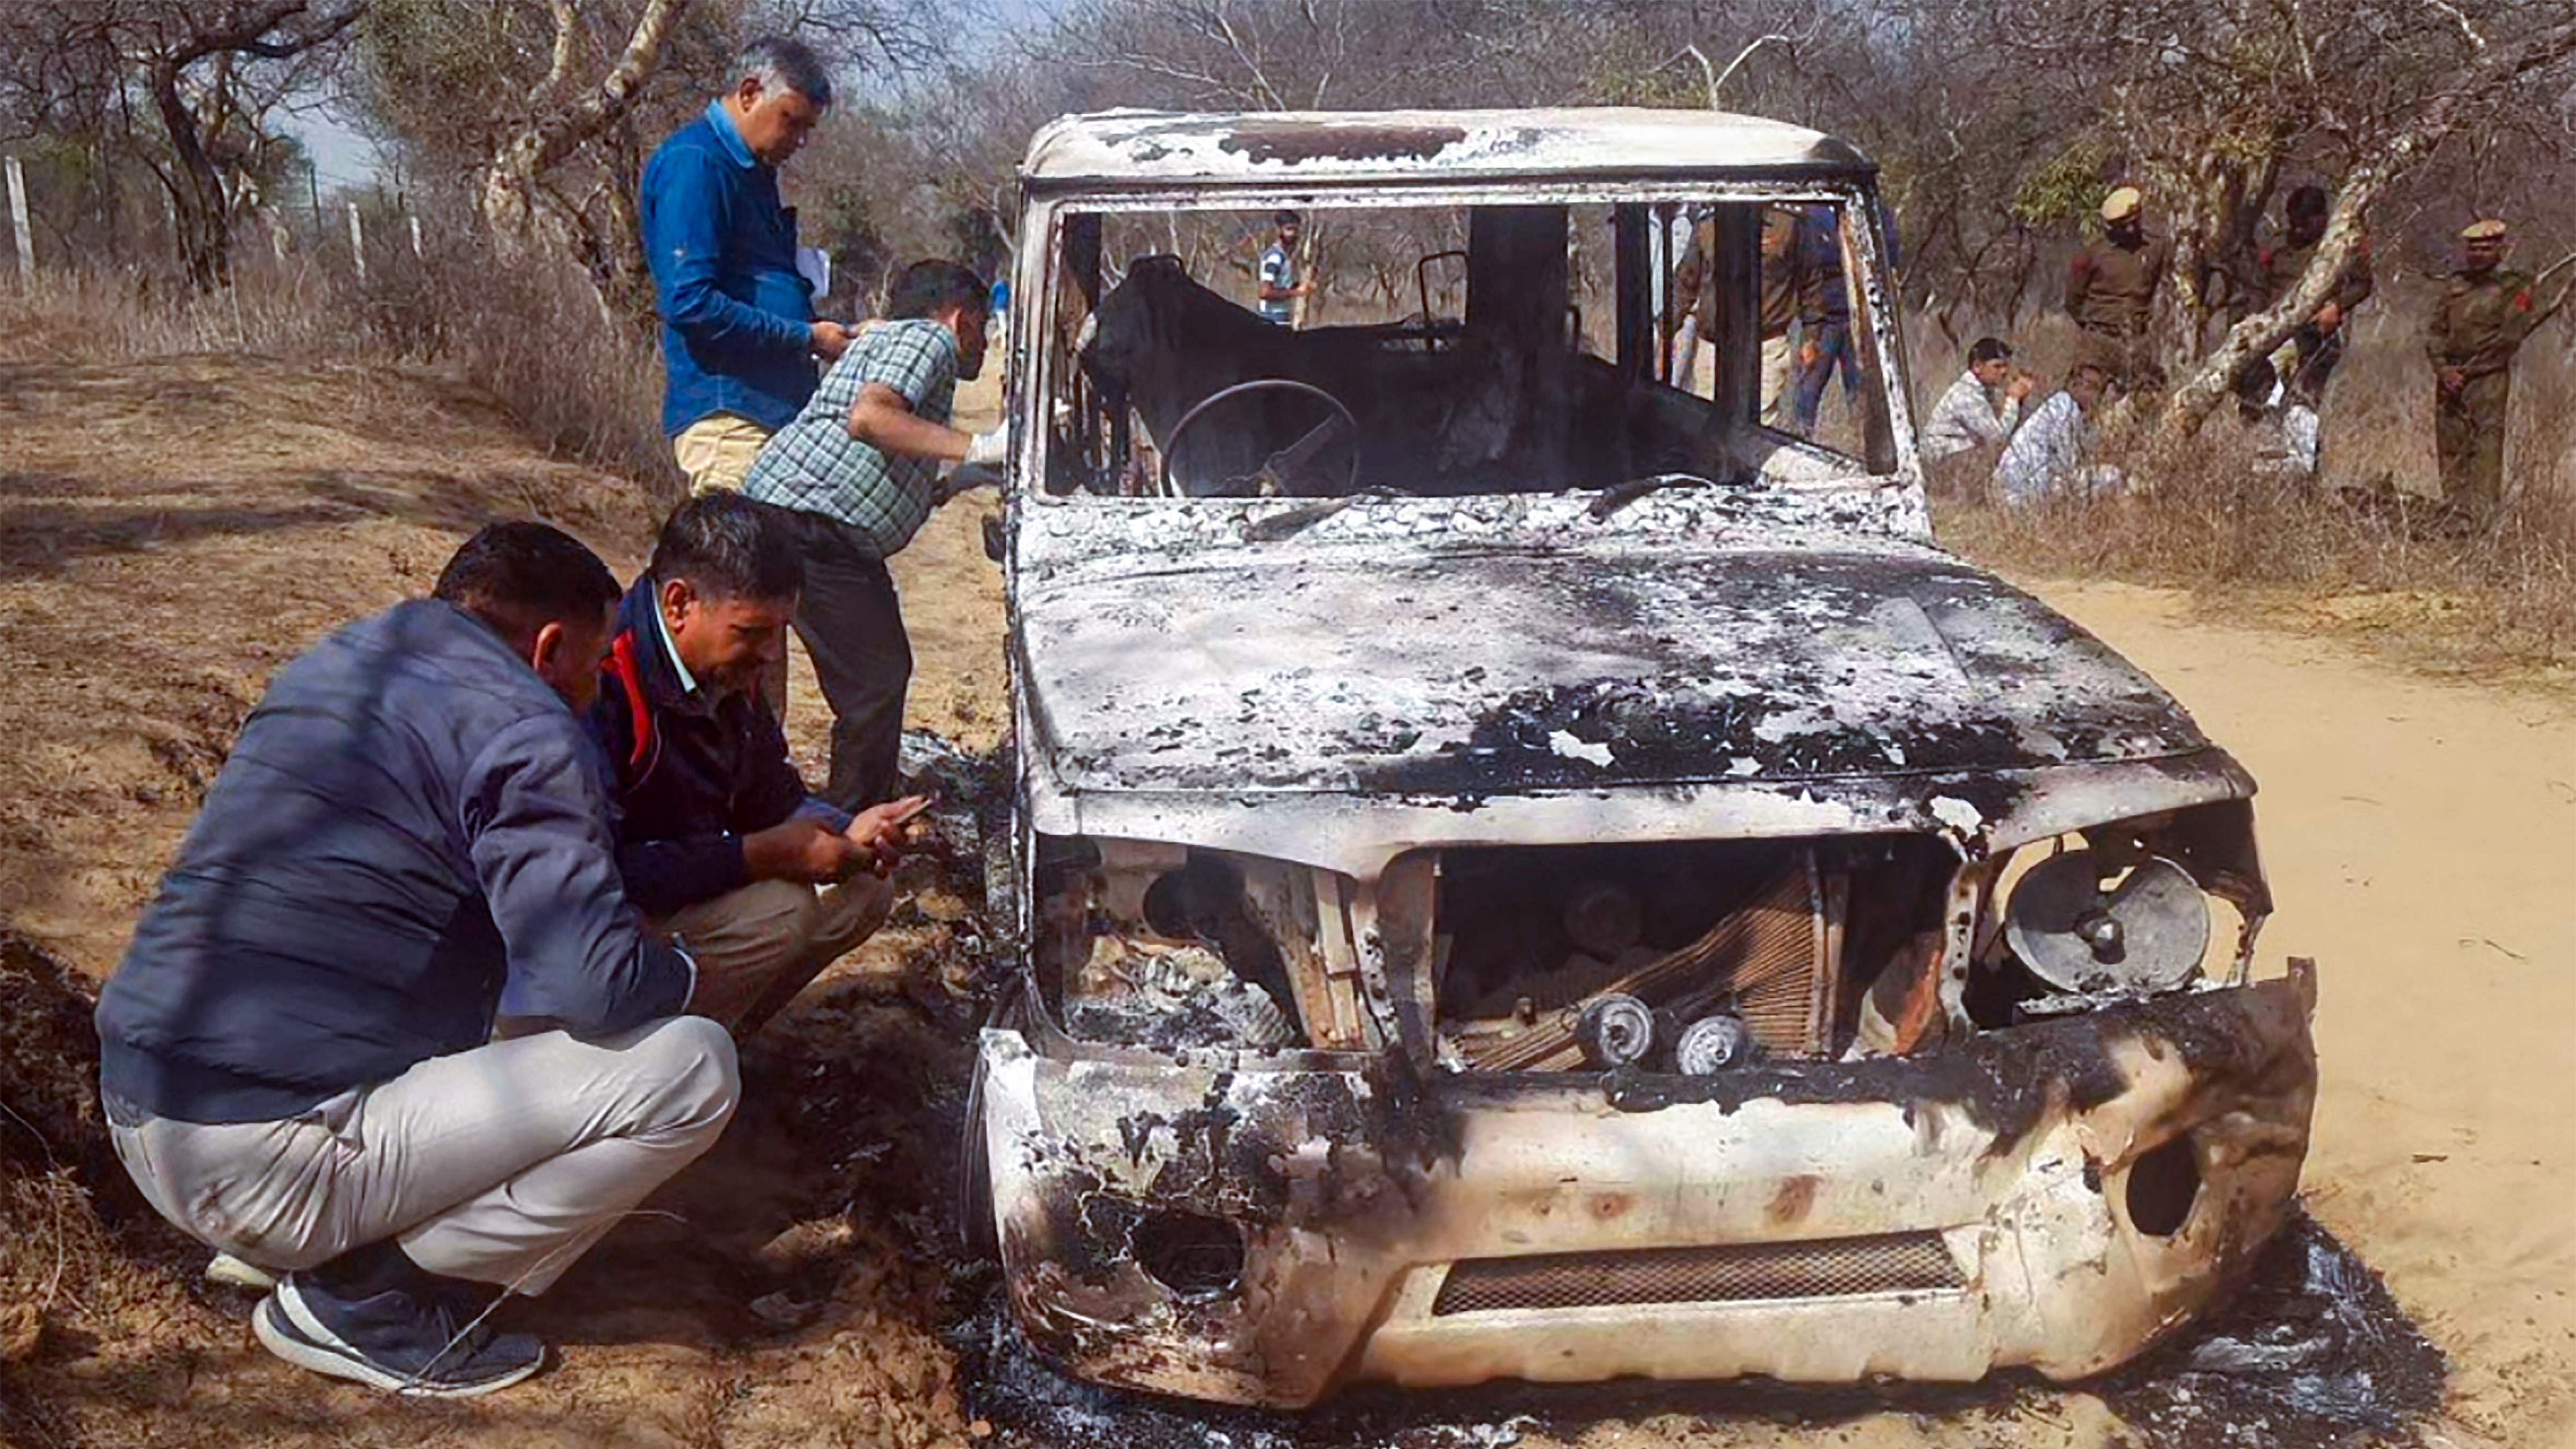 Charred remains of a vehicle where bodies of two Muslim men were found, at Loharu in Bhiwani district, Haryana. Credit: PTI Photo